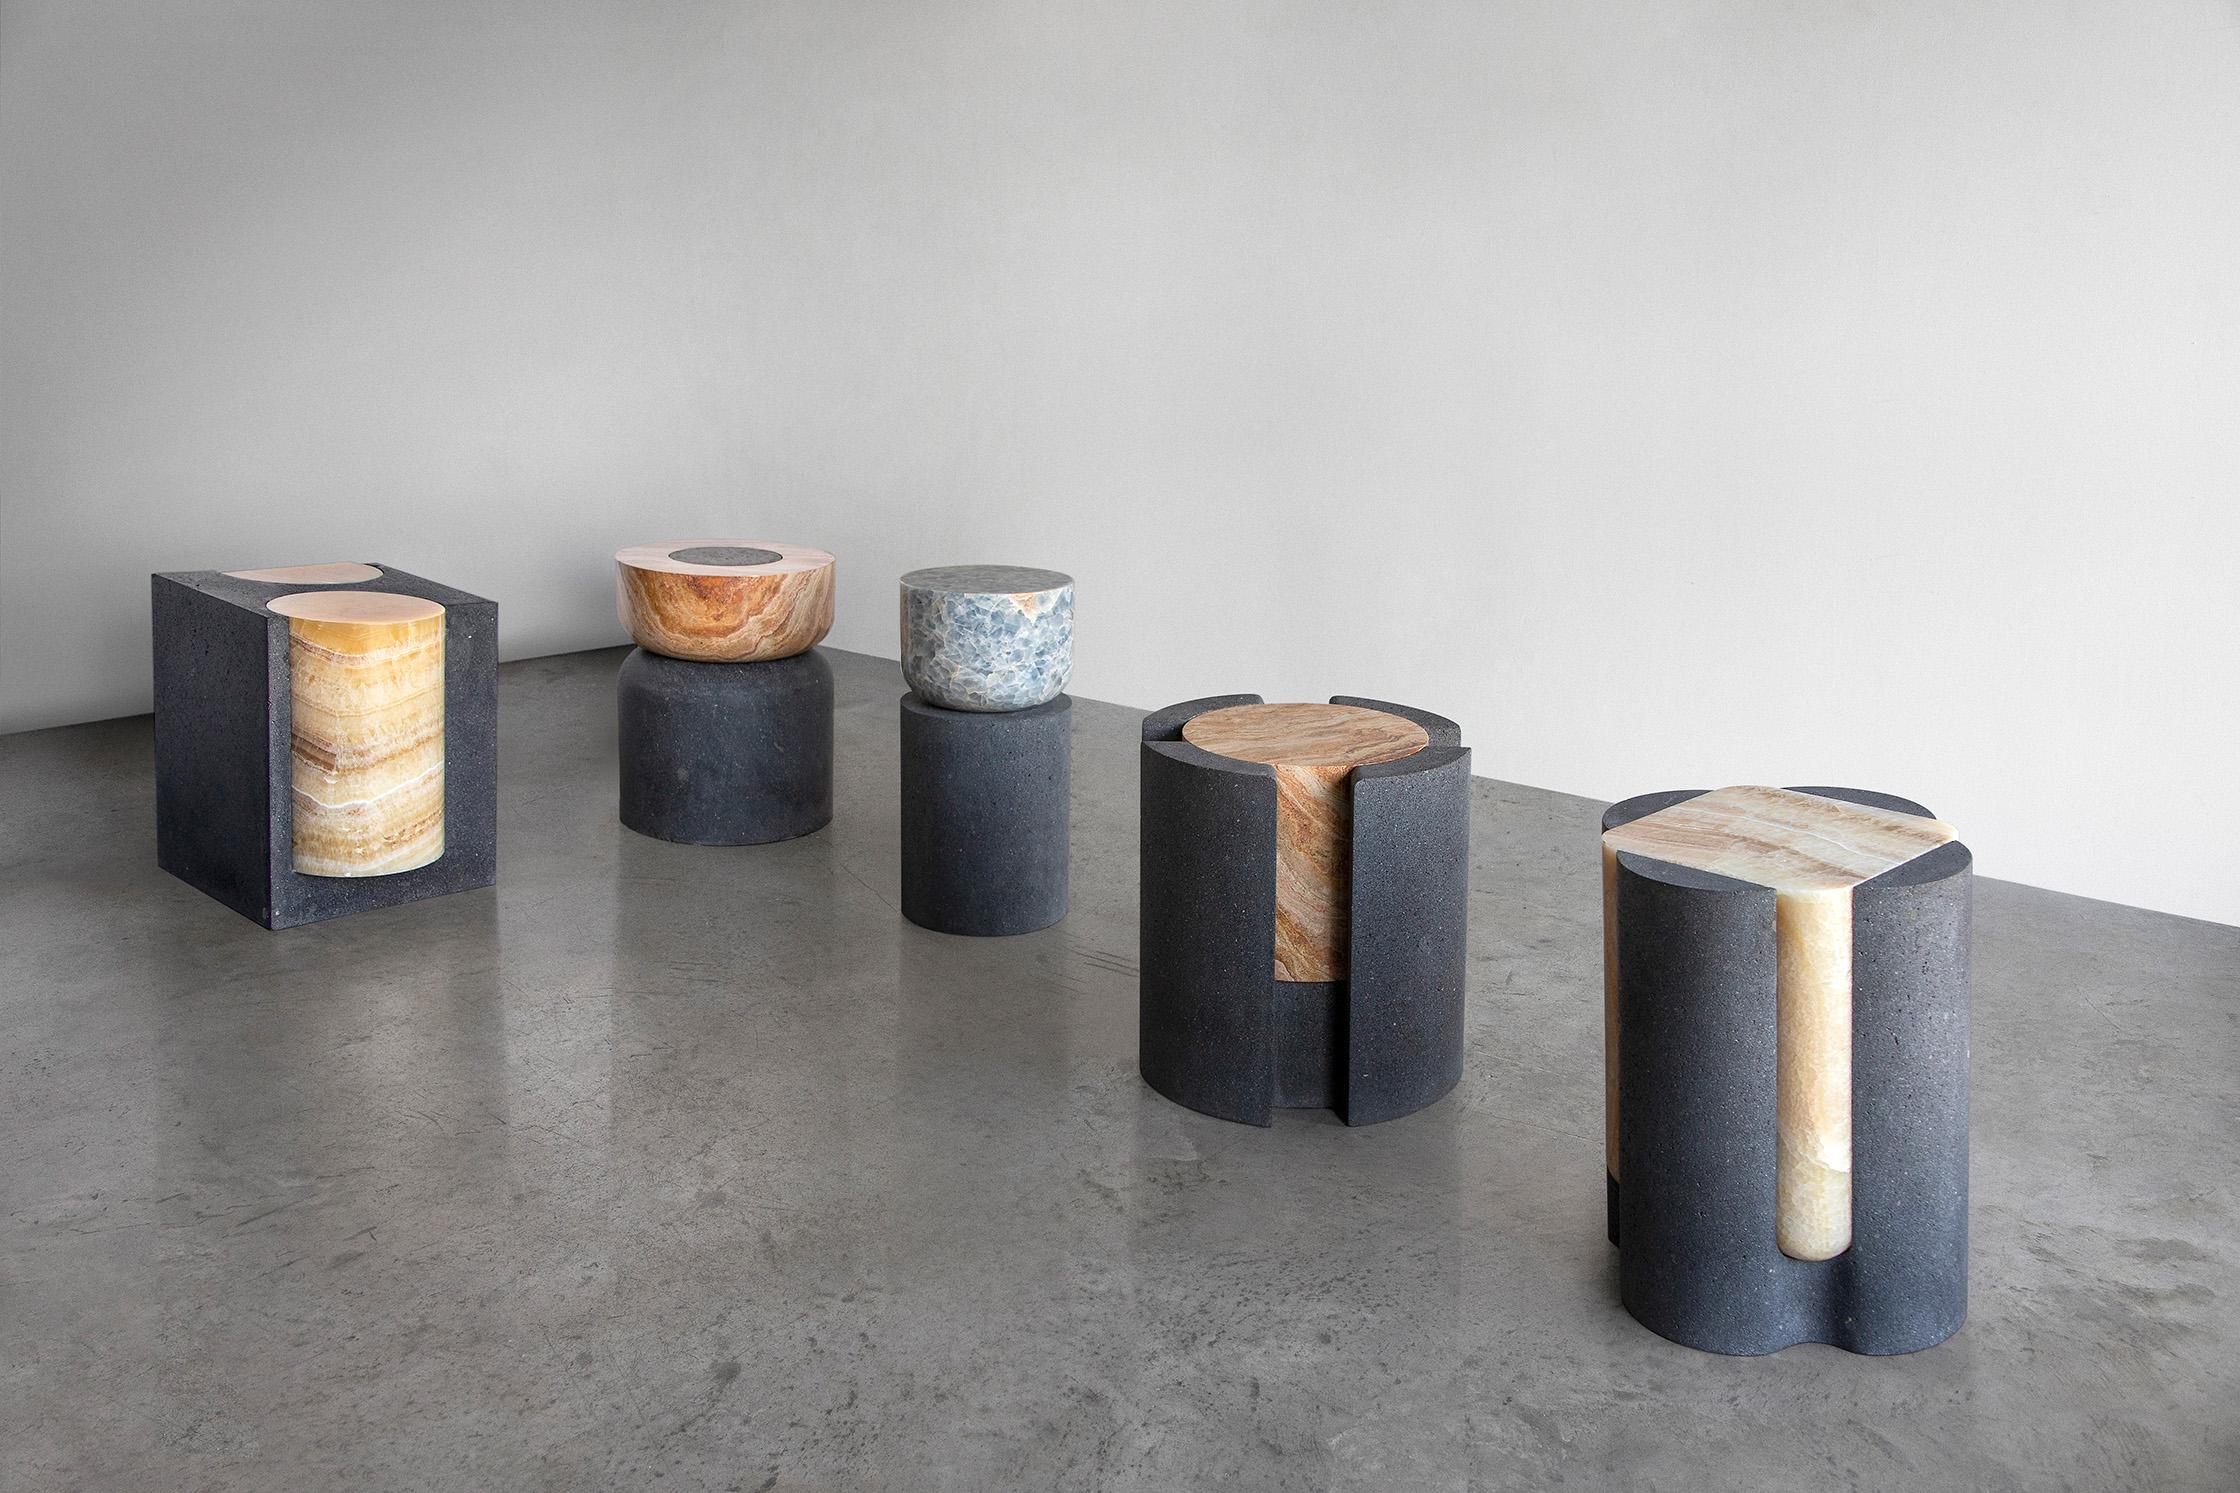 Volcanic Shade V Stool/Table by Sten Studio, Represented by Tuleste Factory For Sale 3